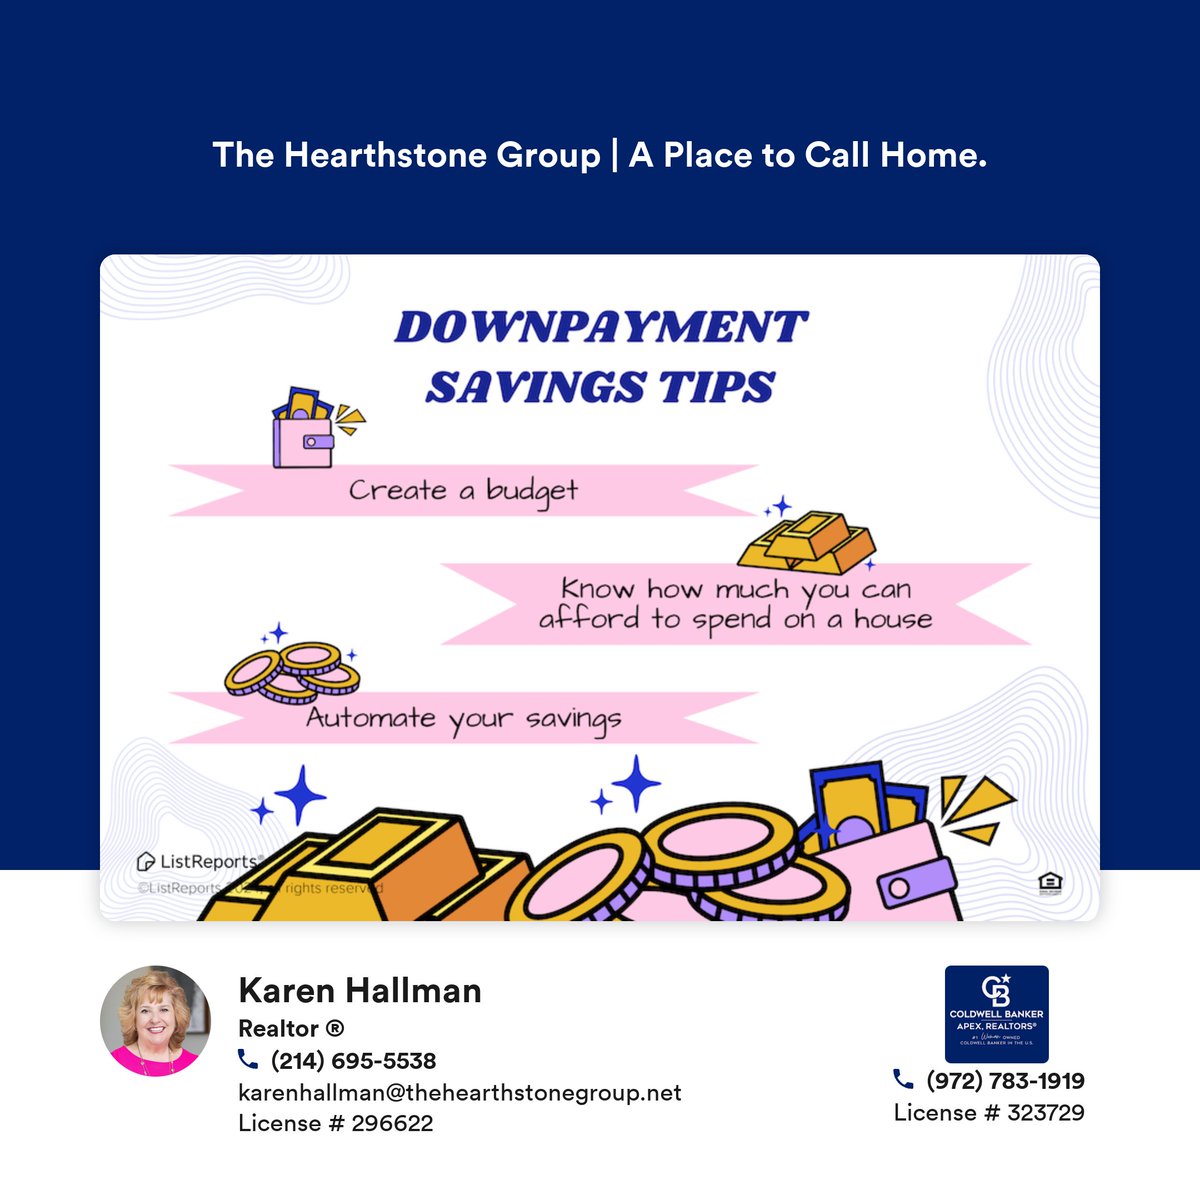 The downpayment is an important part of the home-buying process, so here are some tips to help you prepare. If you're looking for more tips to help you become a homeowner, leave me a comment. I'm a wealth of knowledge, and I'm here to help. 😉 #thehearthstonegroup #topproducer